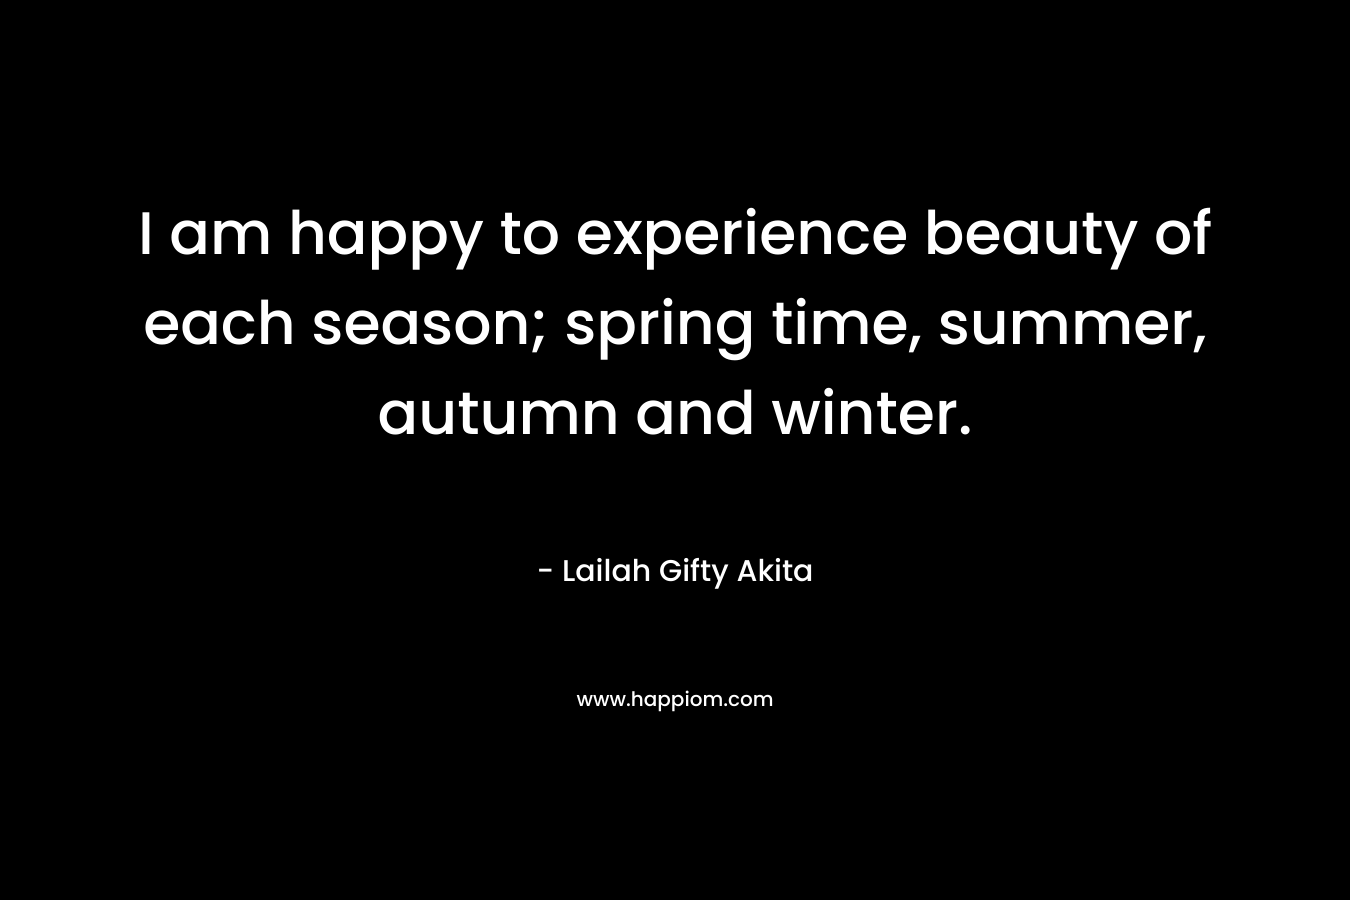 I am happy to experience beauty of each season; spring time, summer, autumn and winter.